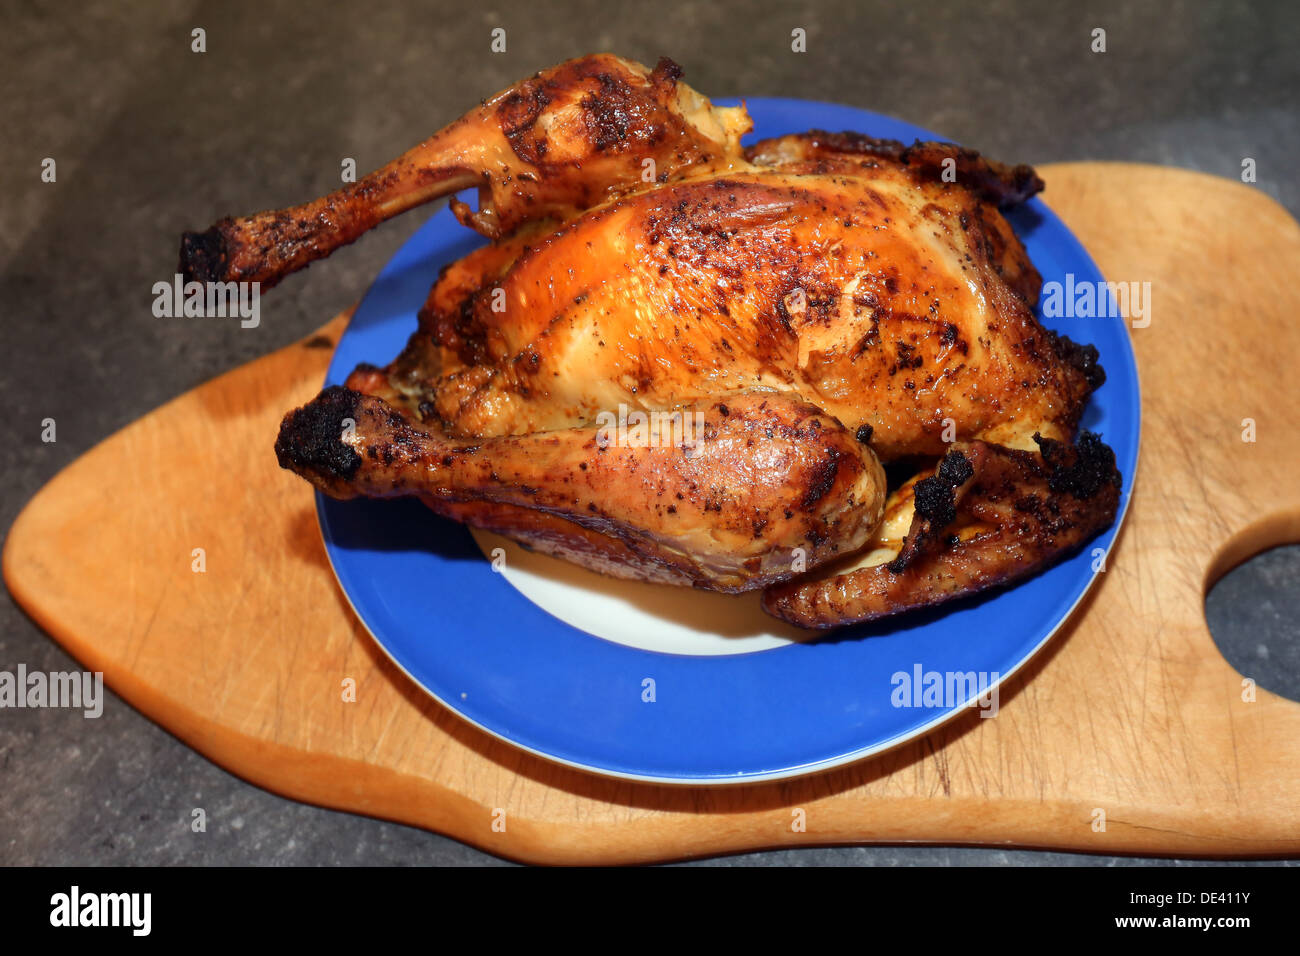 Berlin, Germany, roasted chicken on a plate Stock Photo